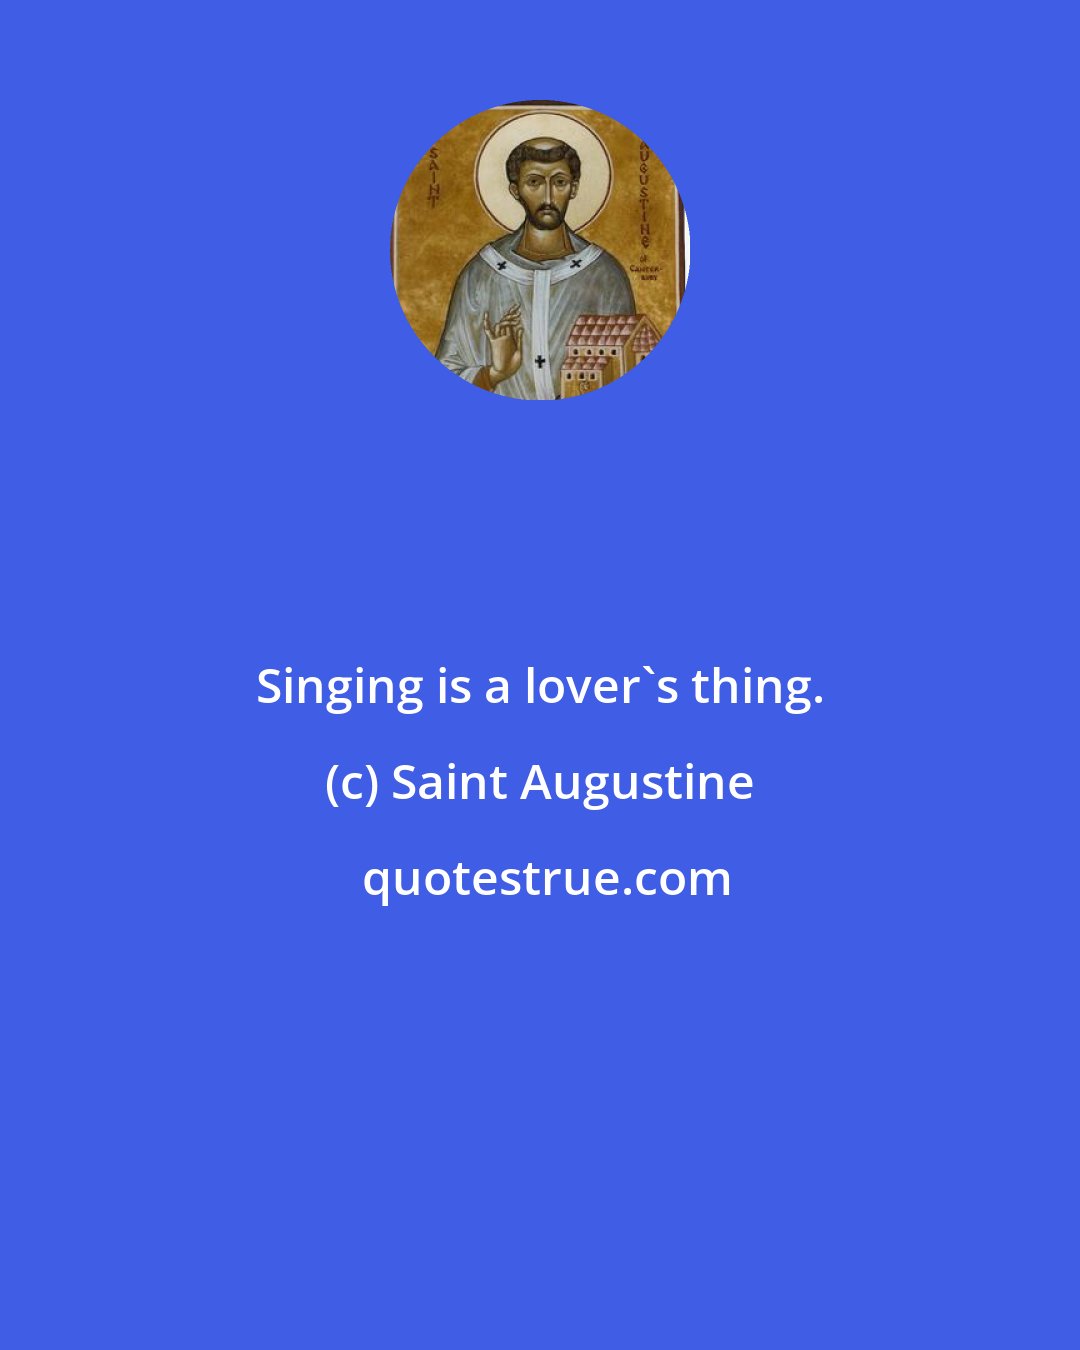 Saint Augustine: Singing is a lover's thing.